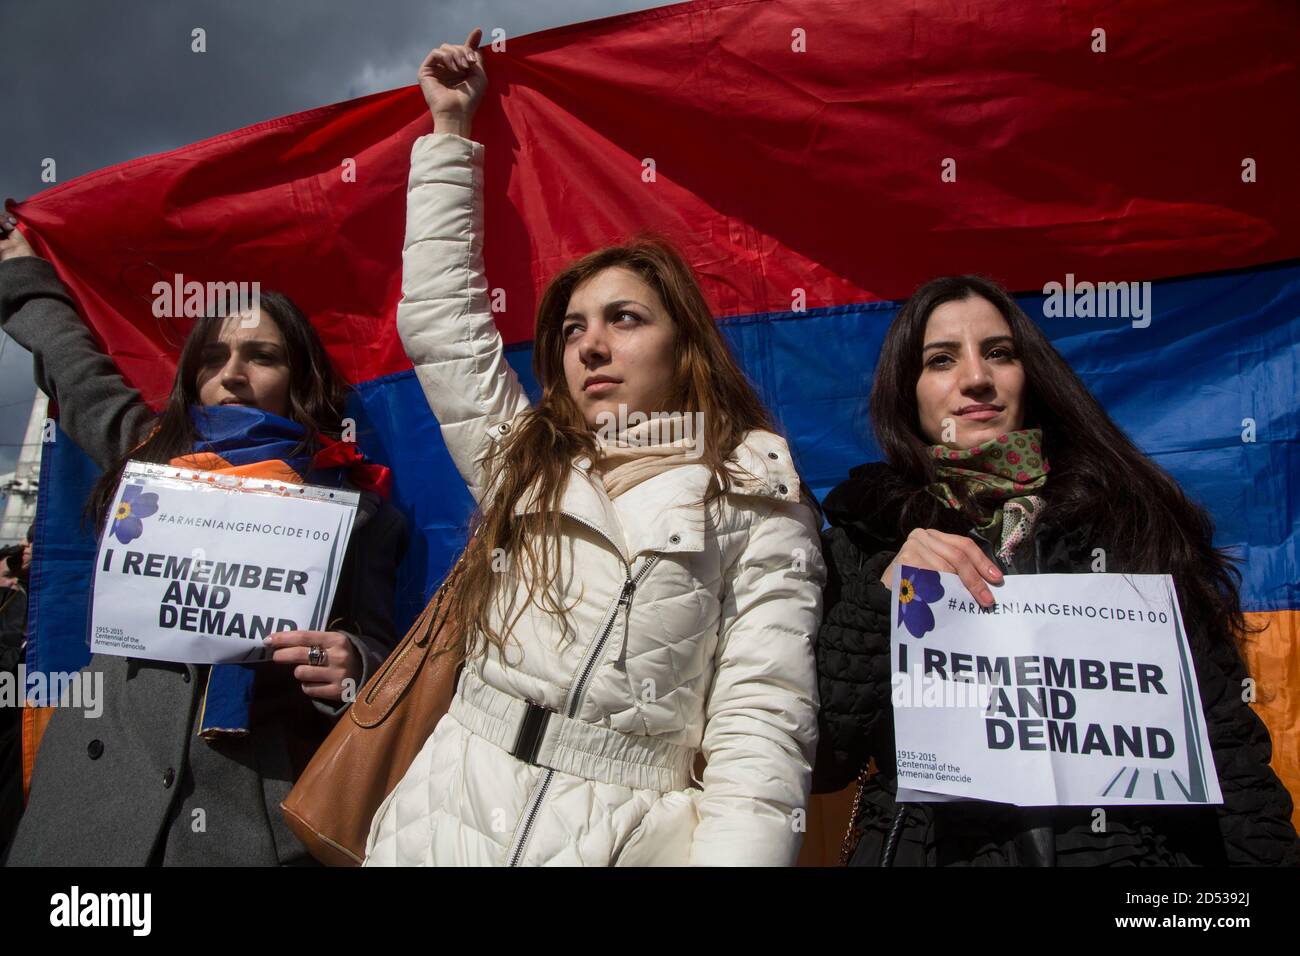 Moscow, Russia. 24th of April, 2015 Armenian girls hold the national flag of Armenia and banners during a rally on the day of remembrance of the victims of the 1915 Armenian genocide in the territory of the Ottoman Empire, in Gorky Park in Moscow, Russia Stock Photo